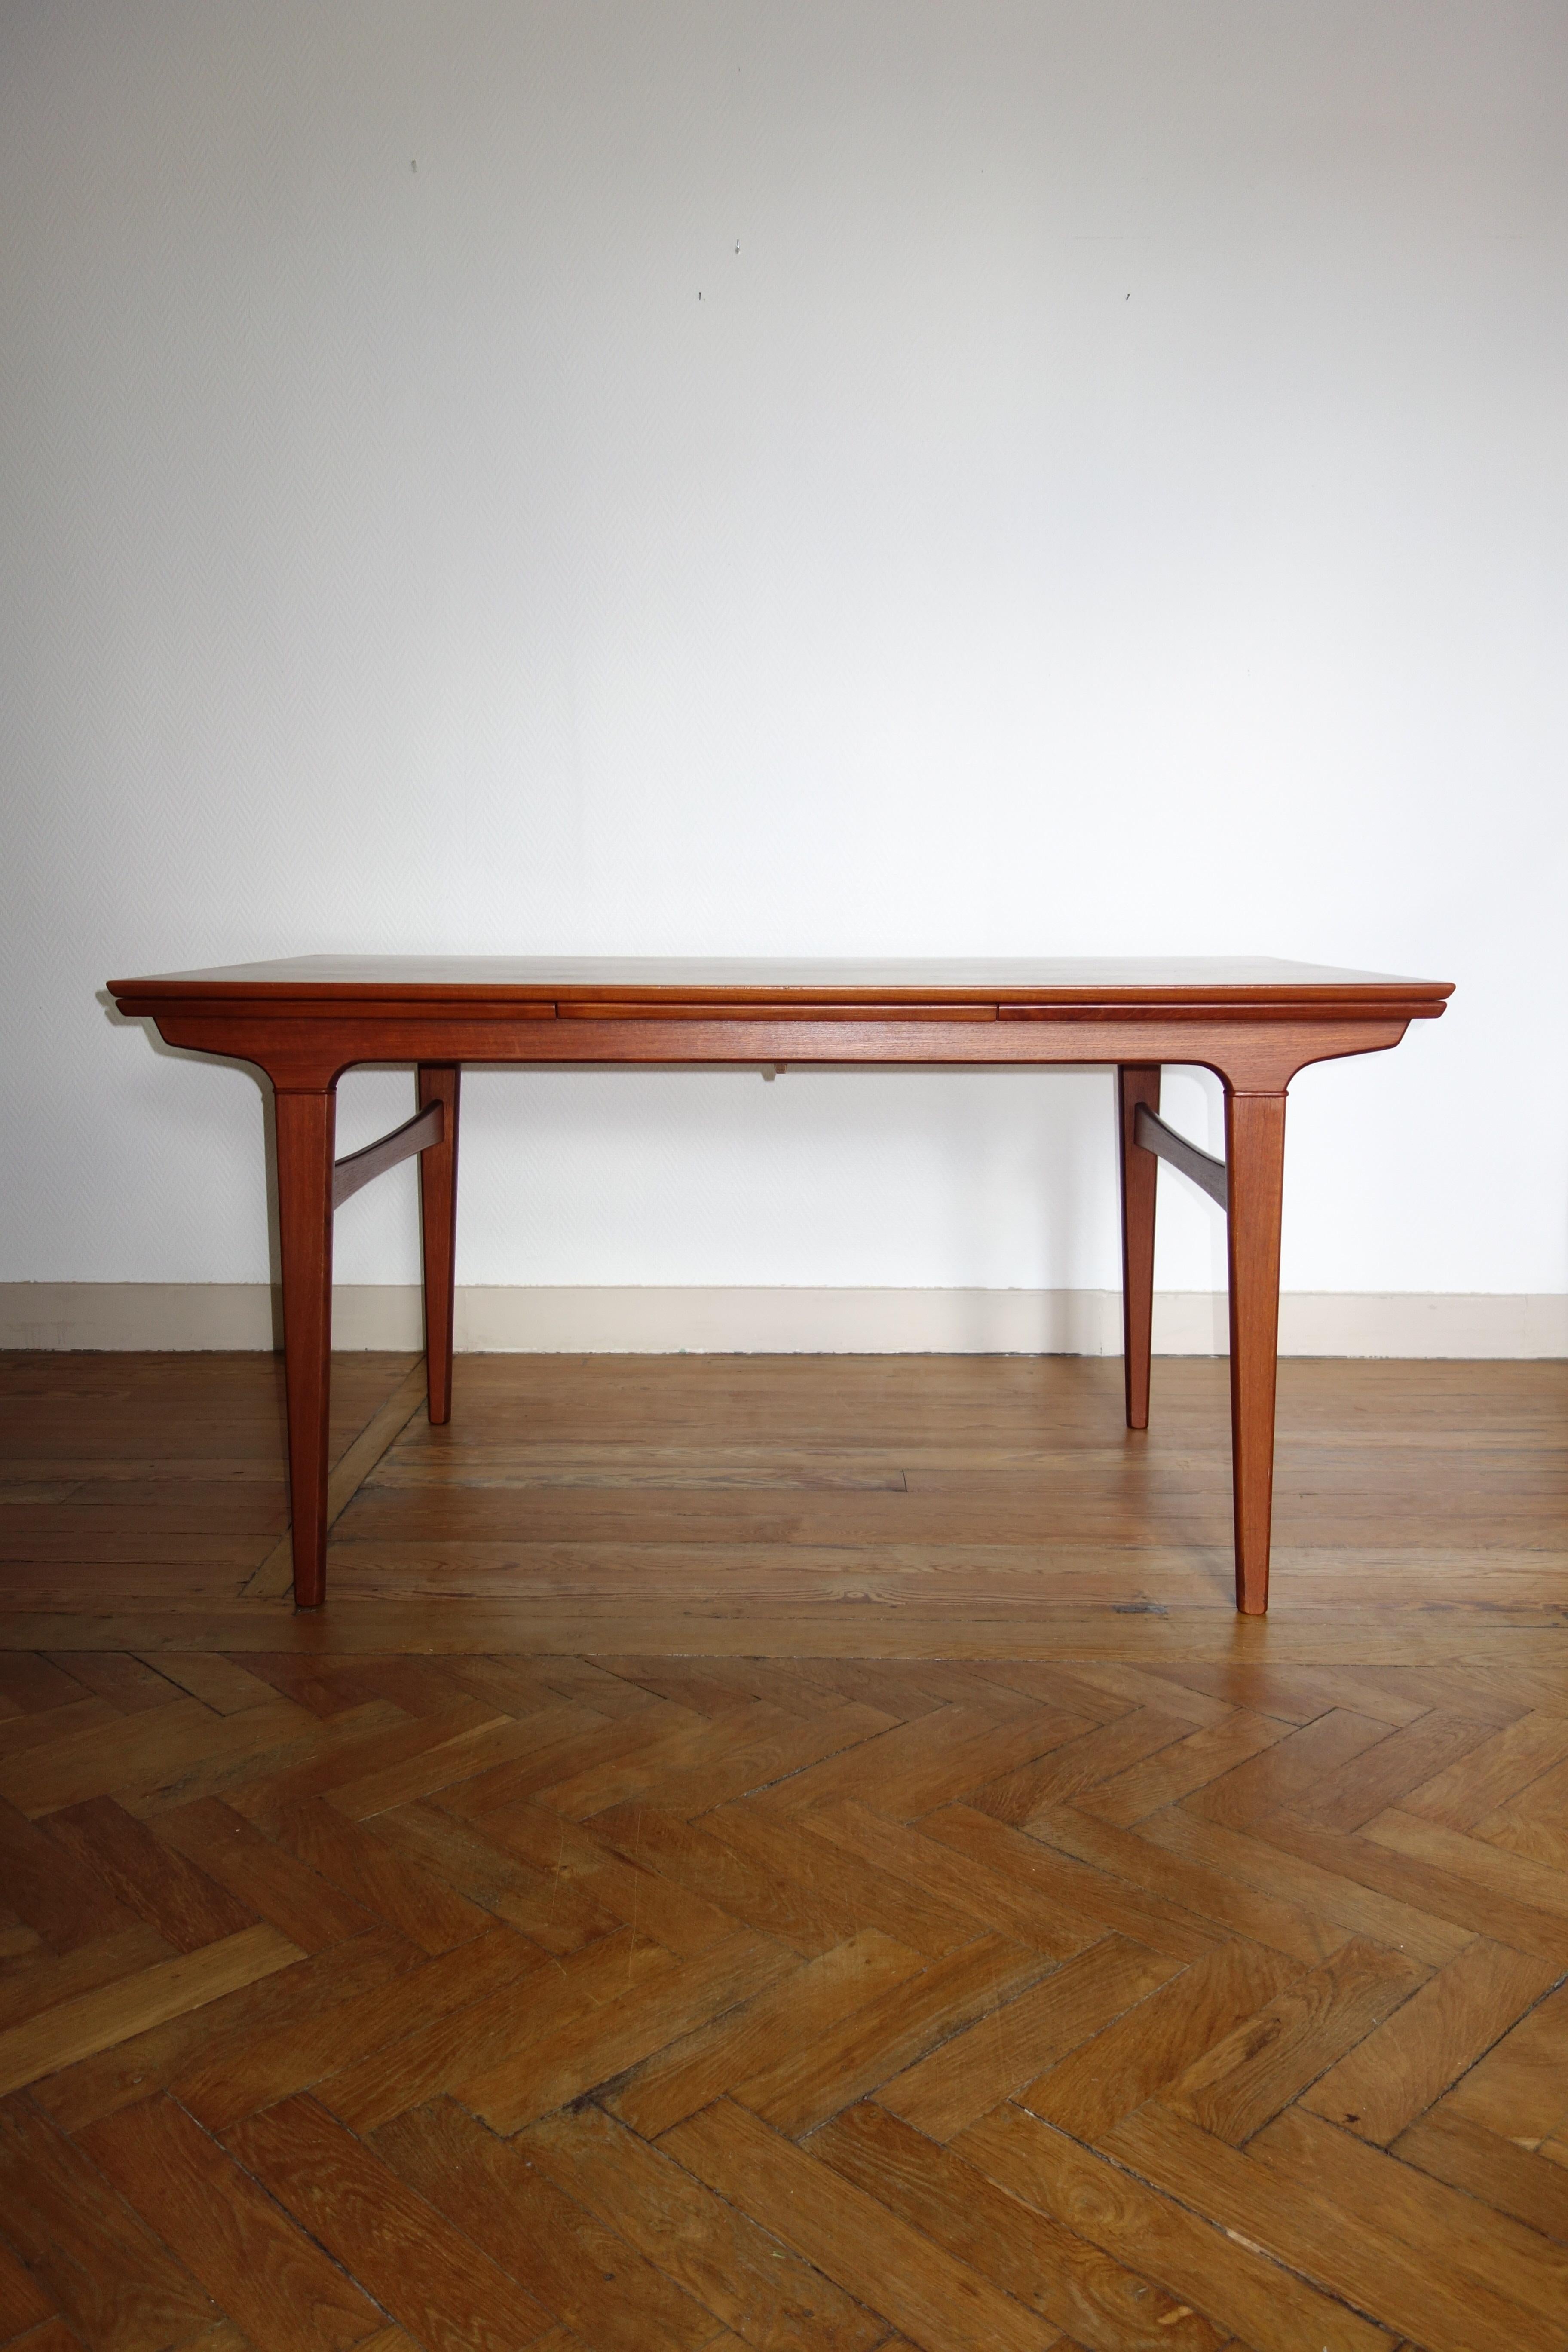 Scandinavian dining table, made in Denmark, 1960s. Stamp present with serial number. Teak model with extensions at the ends. Capacity of 10 seats. Minimum length of 1m50 and 2m50 maximum. Superb state of conservation, article restored. Noted a